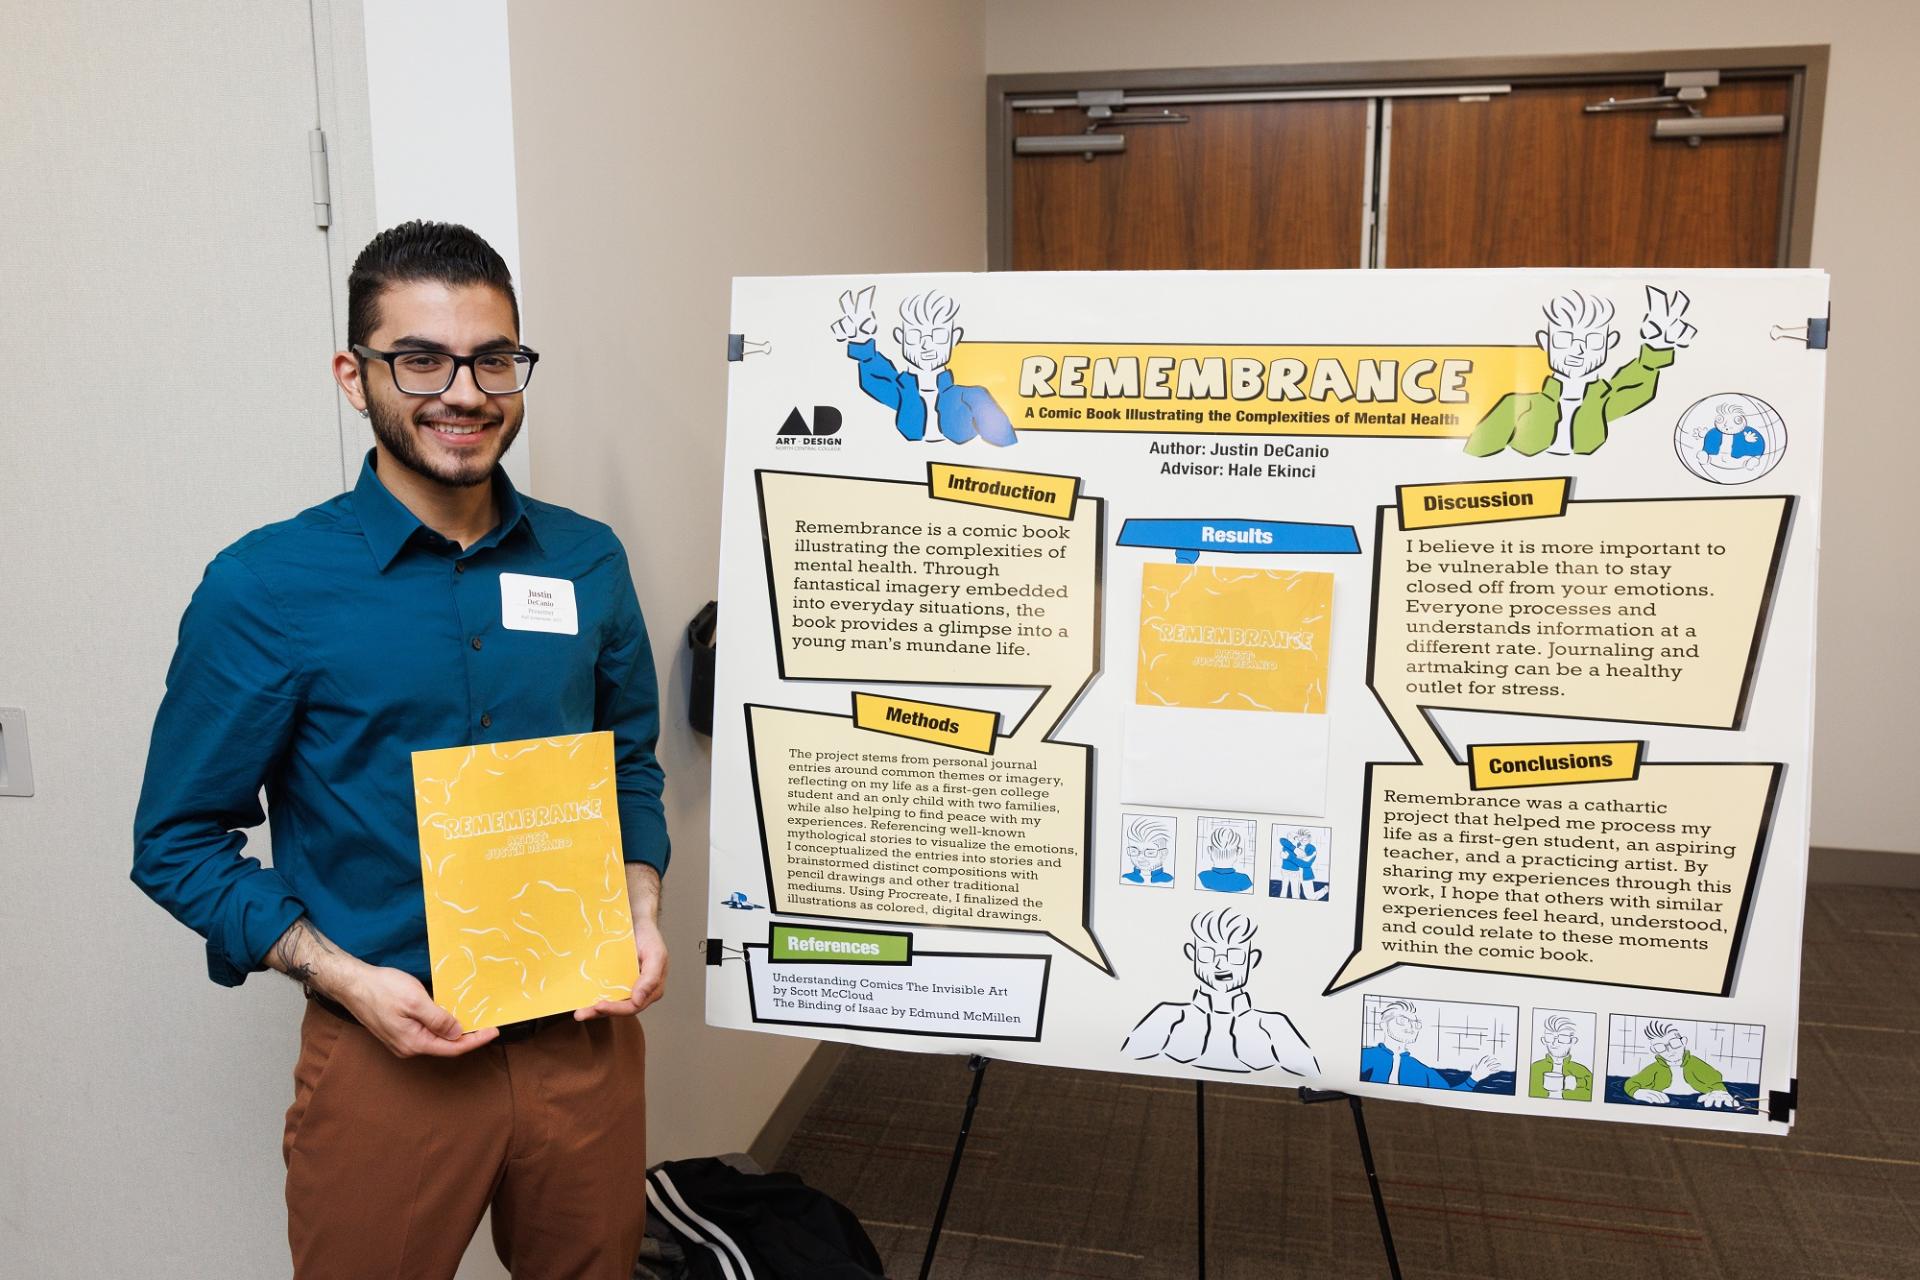 A student presenter at North Central College's Rall Symposium.